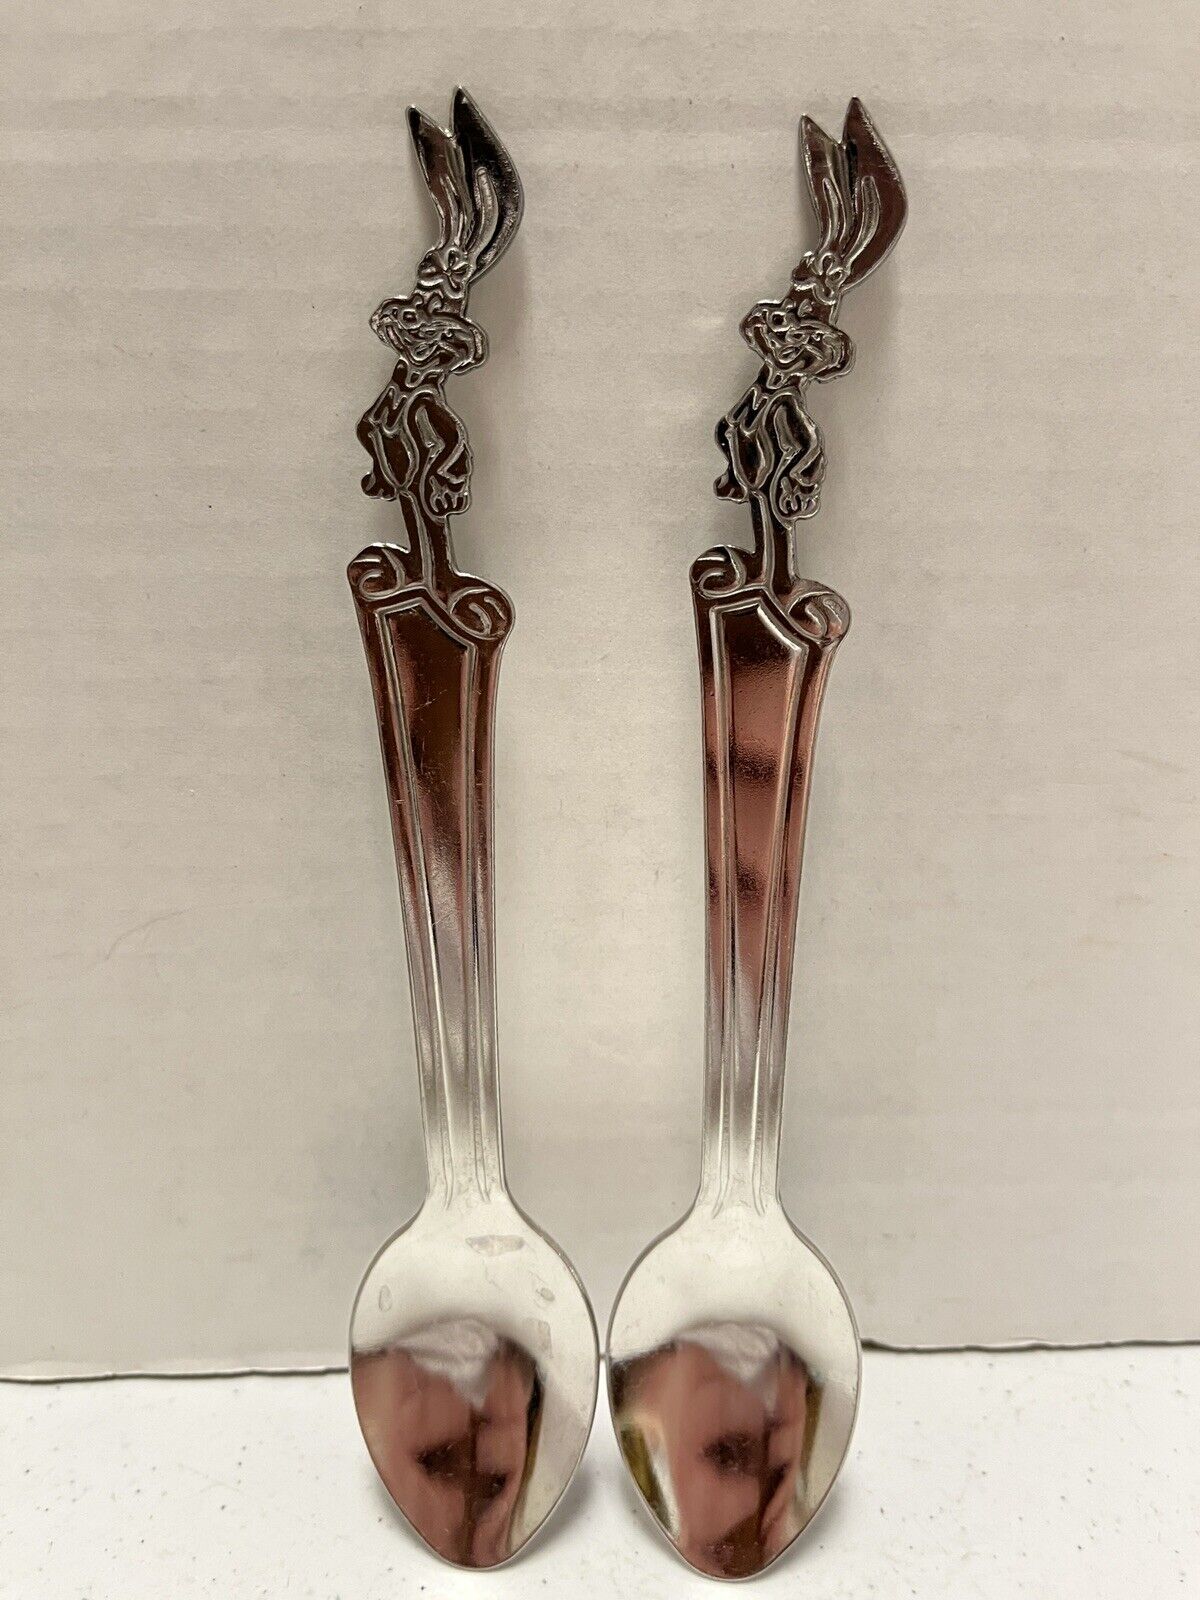 Nestle Quik Bunny Spoons (2) Stainless Steel Vintage 